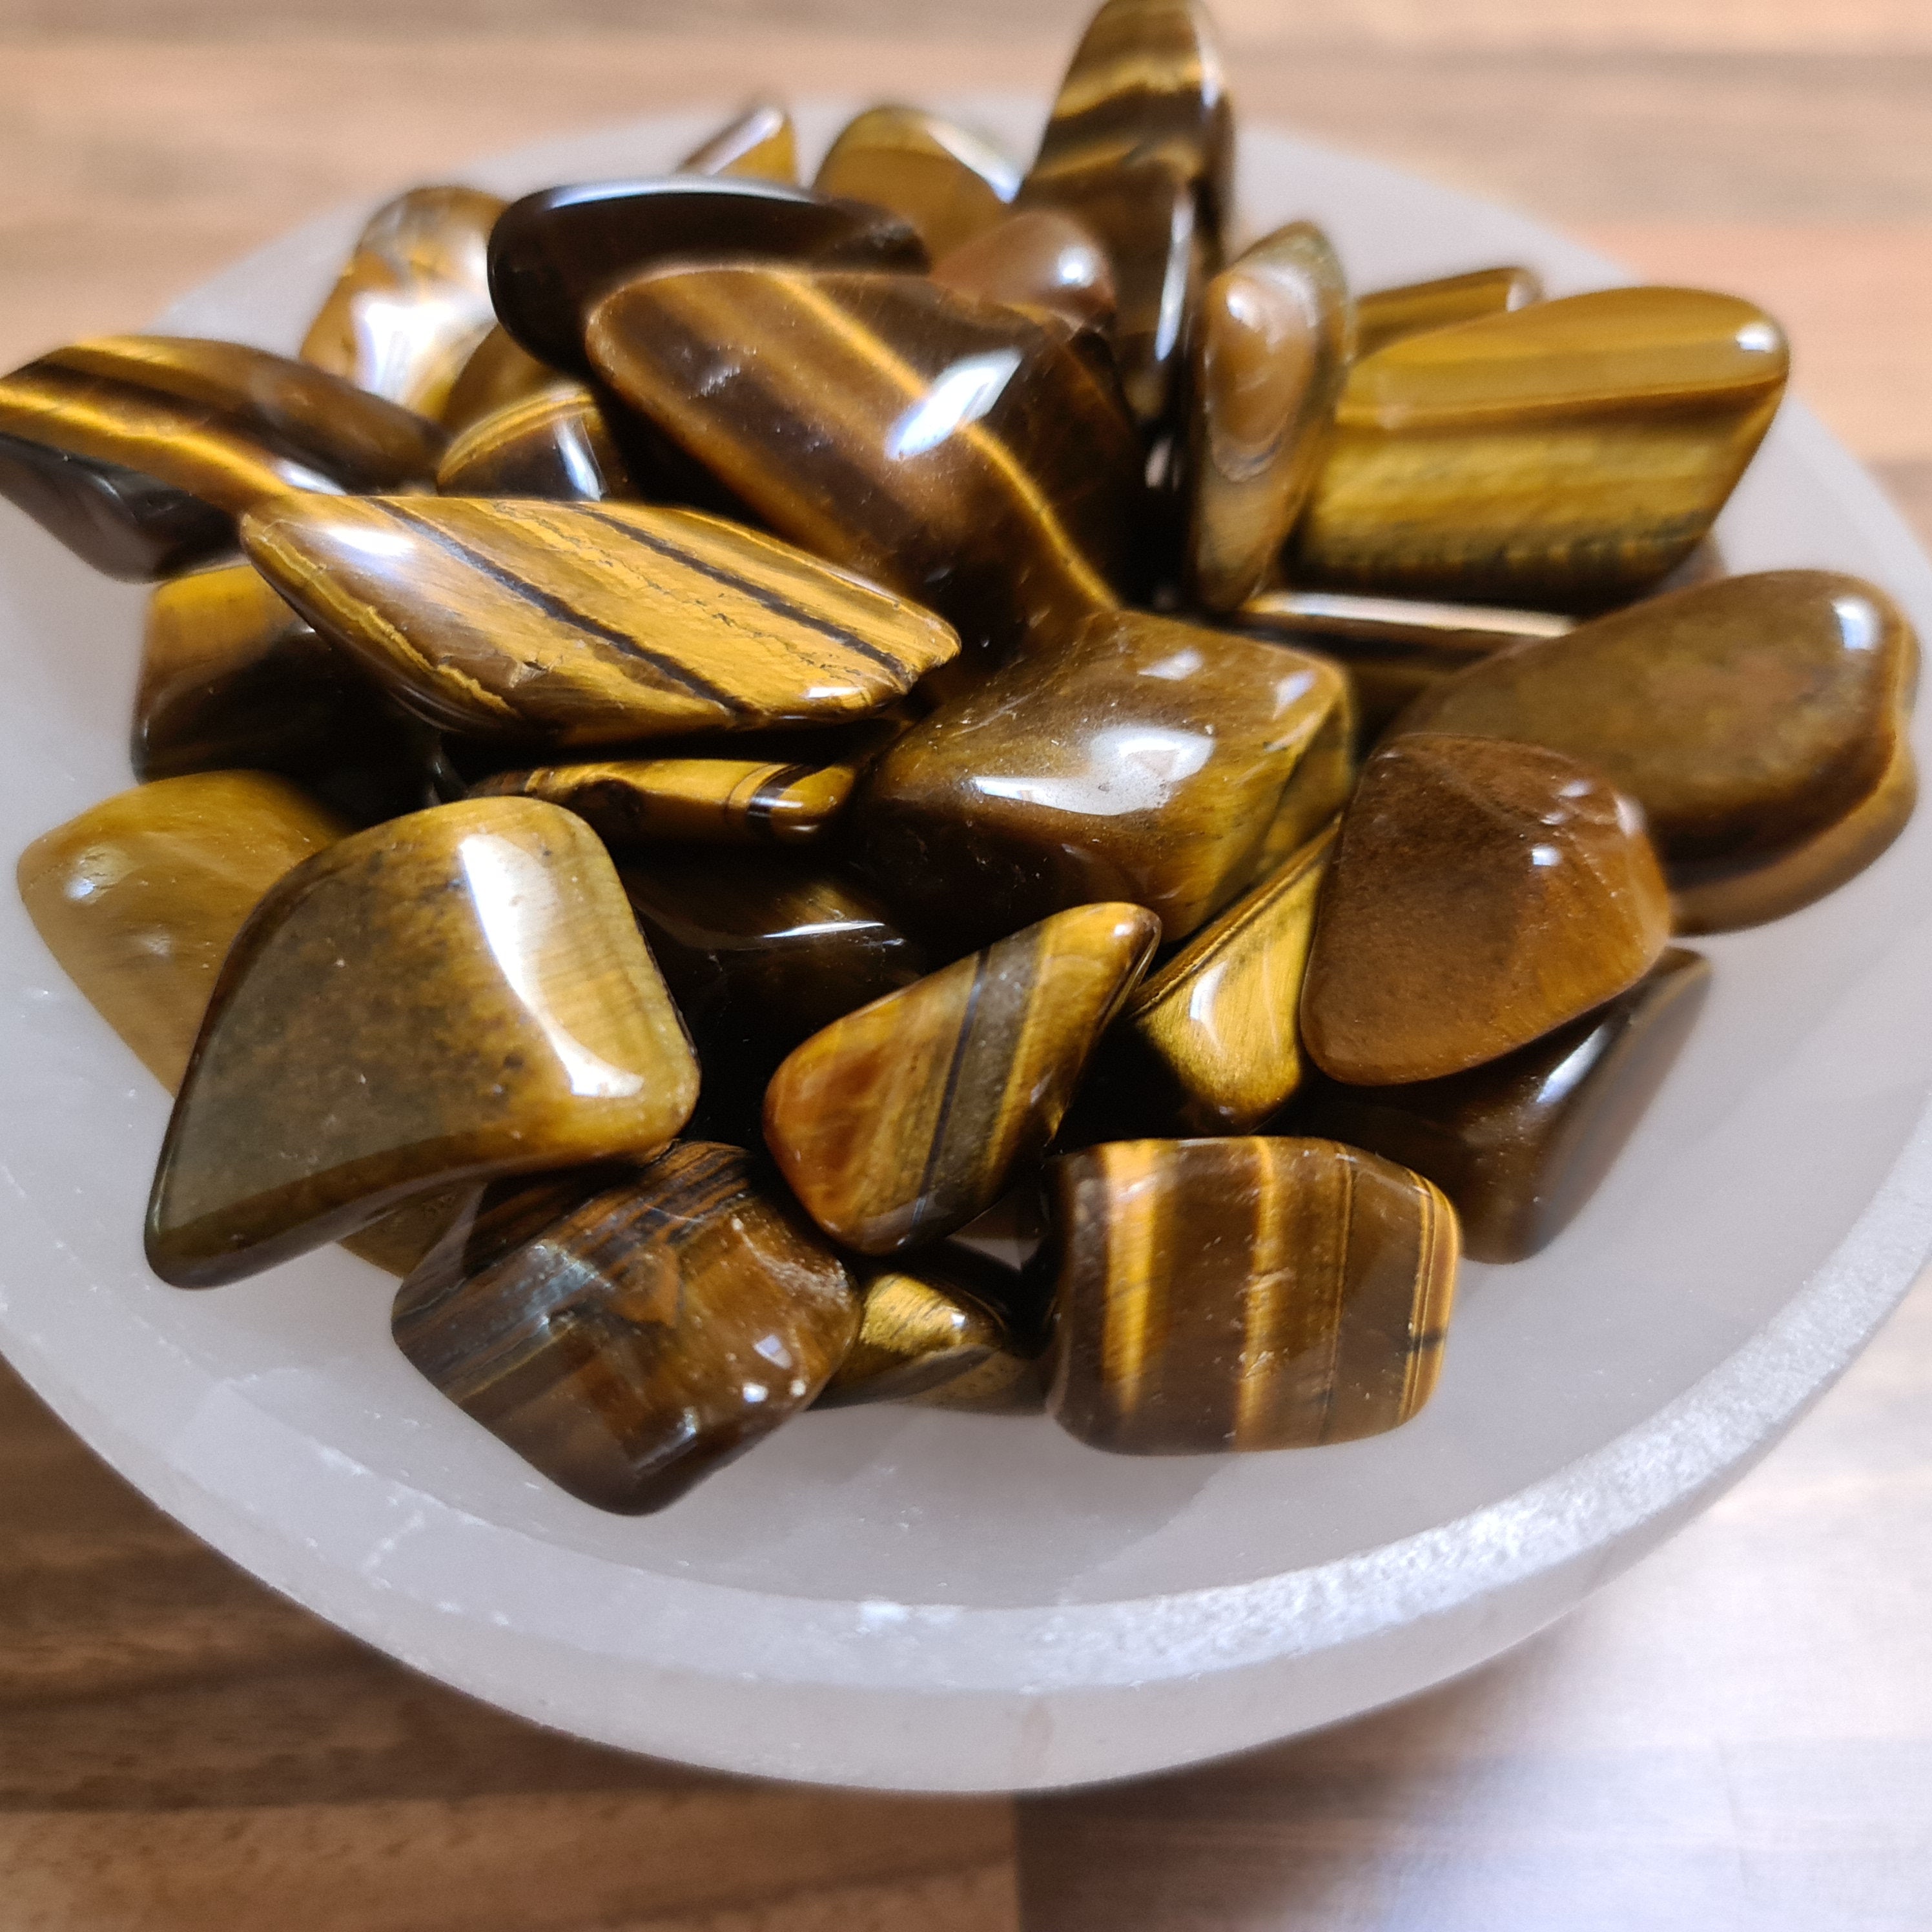 Tiger Eye Gold Tumbled Stones, Protection Crystal, Crystal Healing, Crystal Tumble Stones, Tiger Eye Crystal, Tiger Eye Stones, Gift